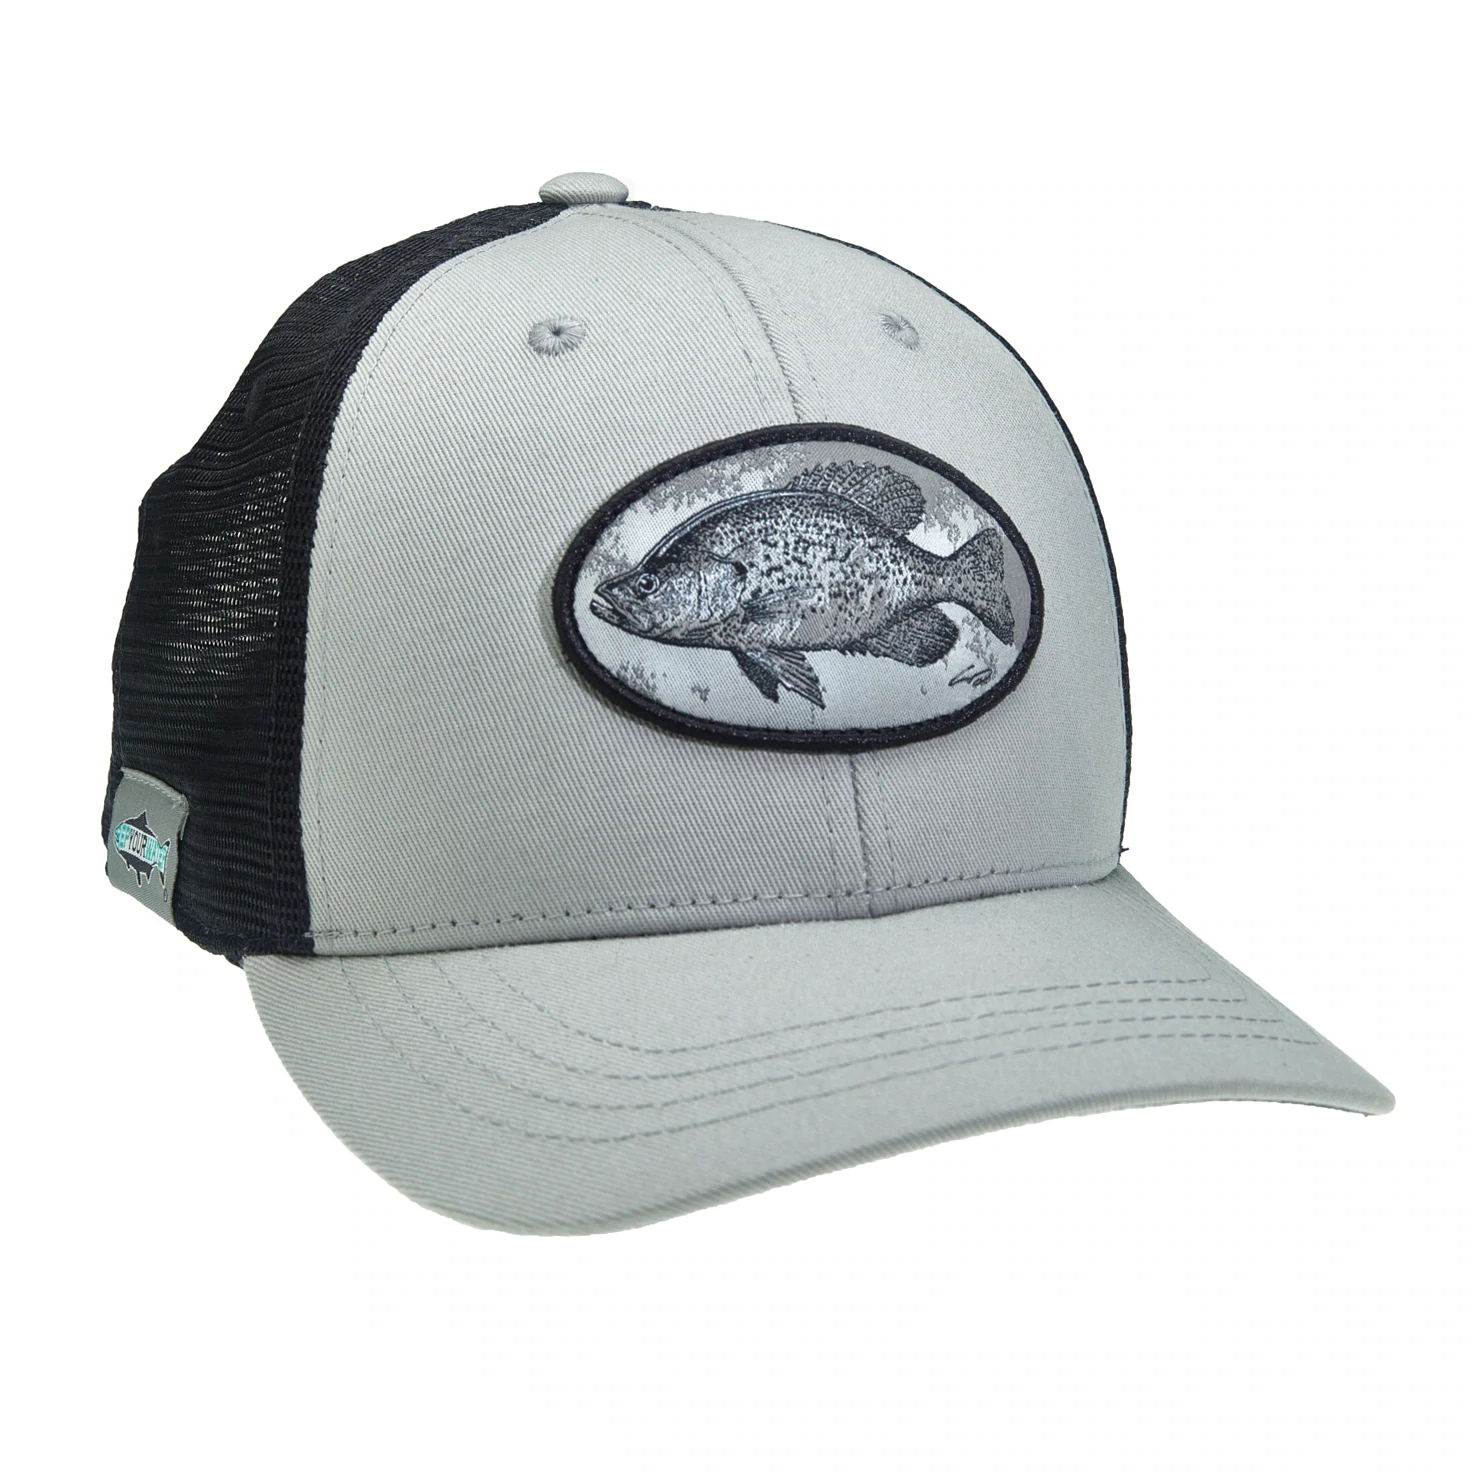 Yellowstone Angler XL fit hat